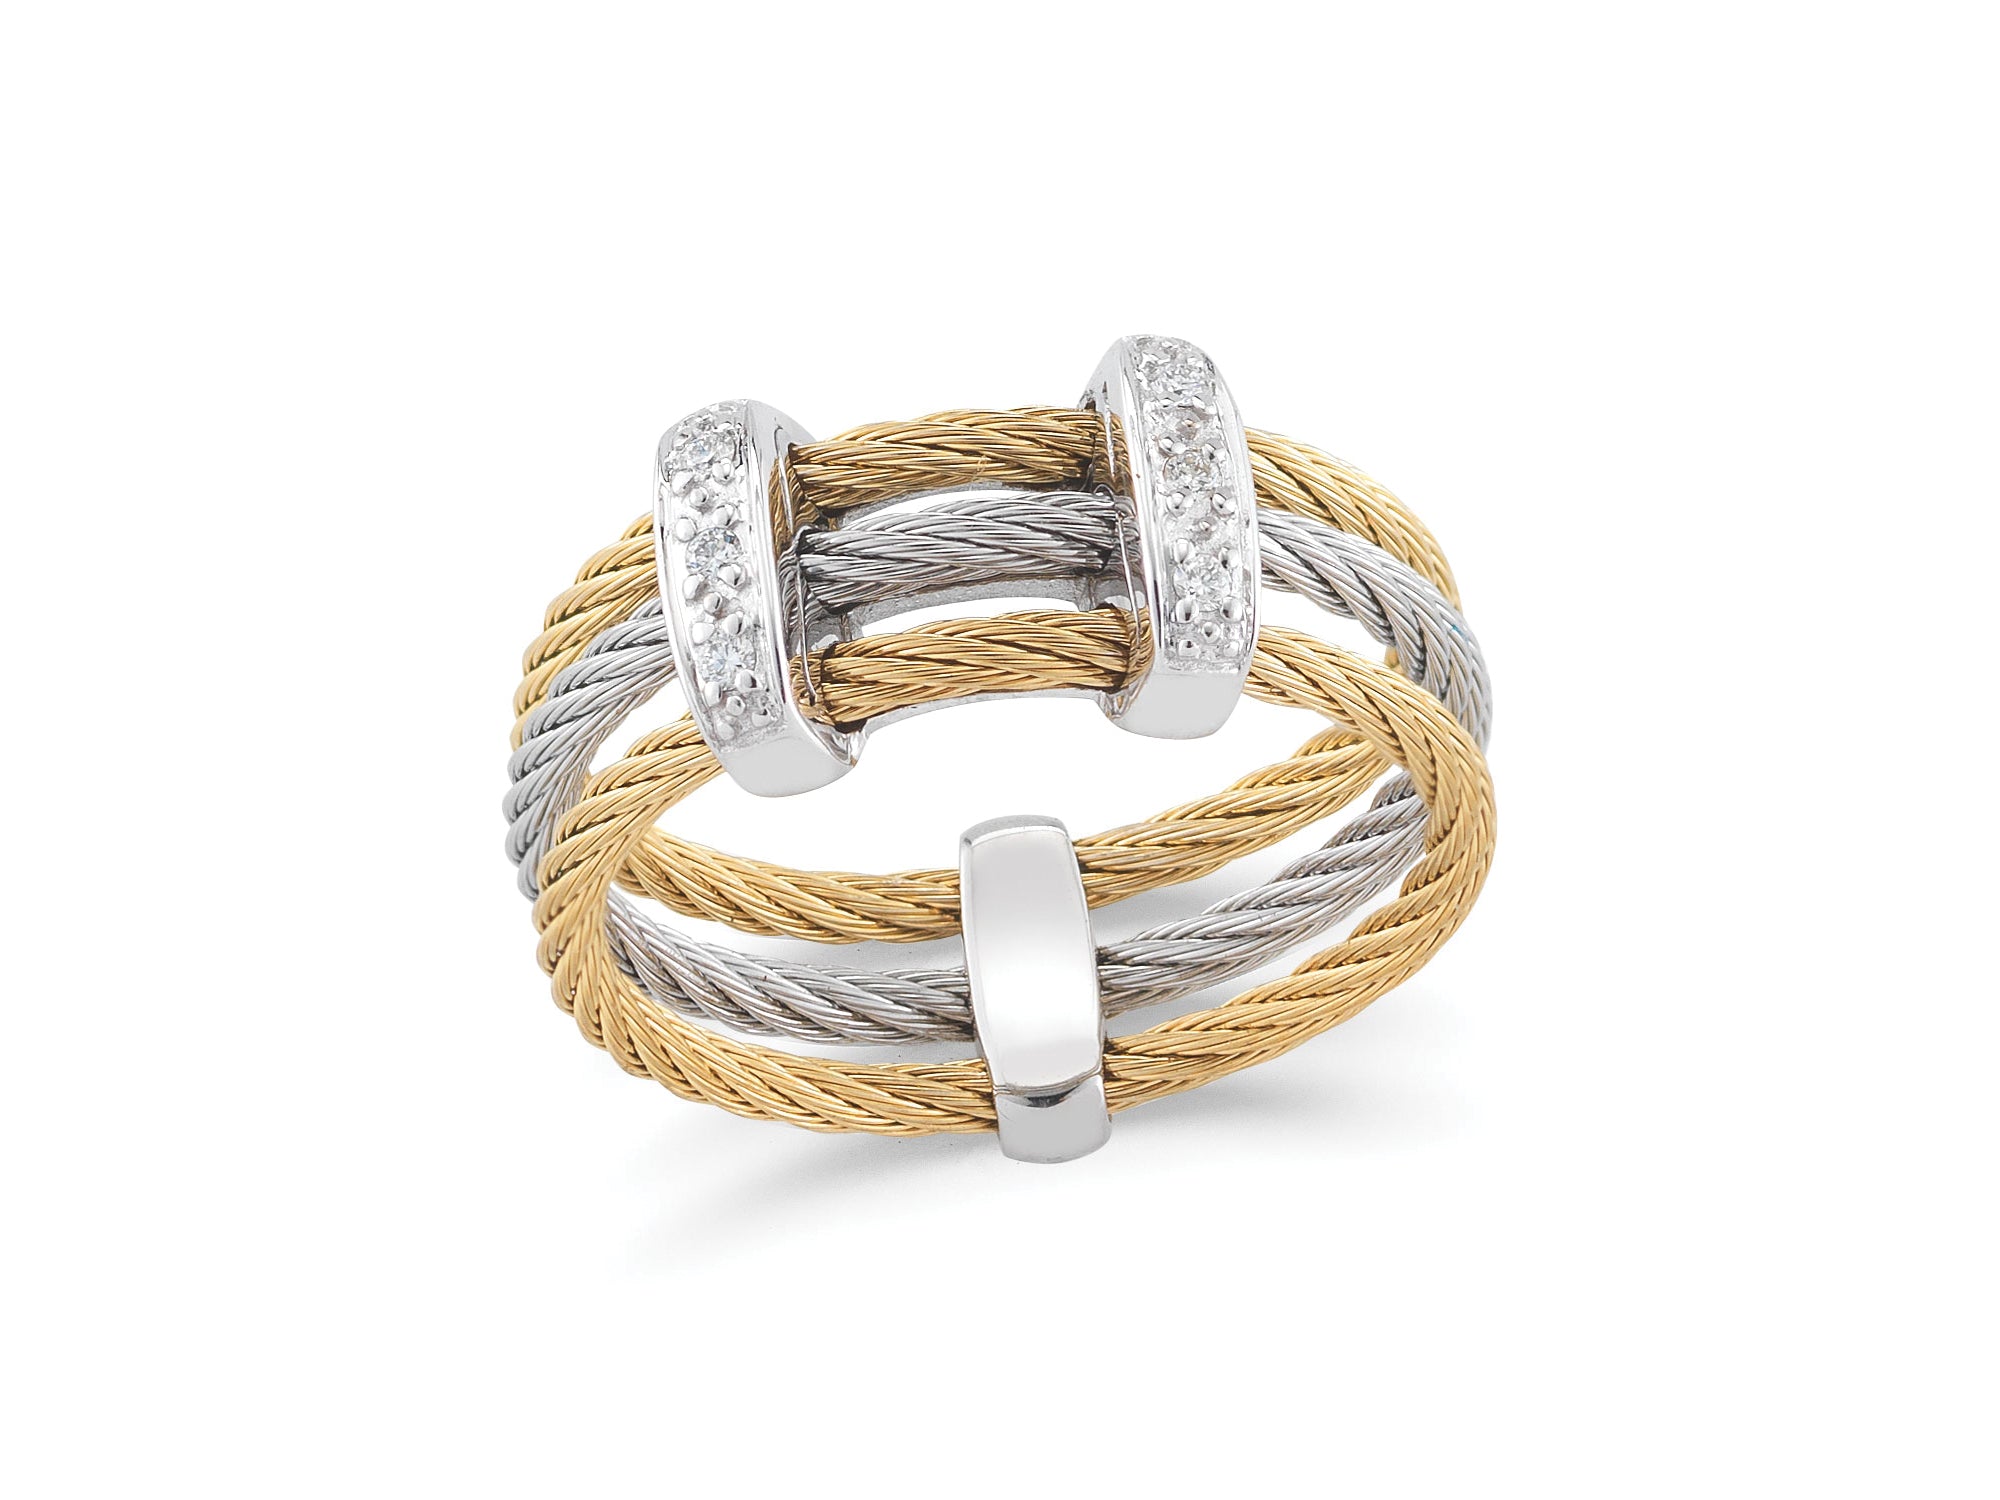 Alor Yellow cable and grey cable, 18 karat White Gold, 0.05 total carat weight Diamonds with stainless steel. Imported.